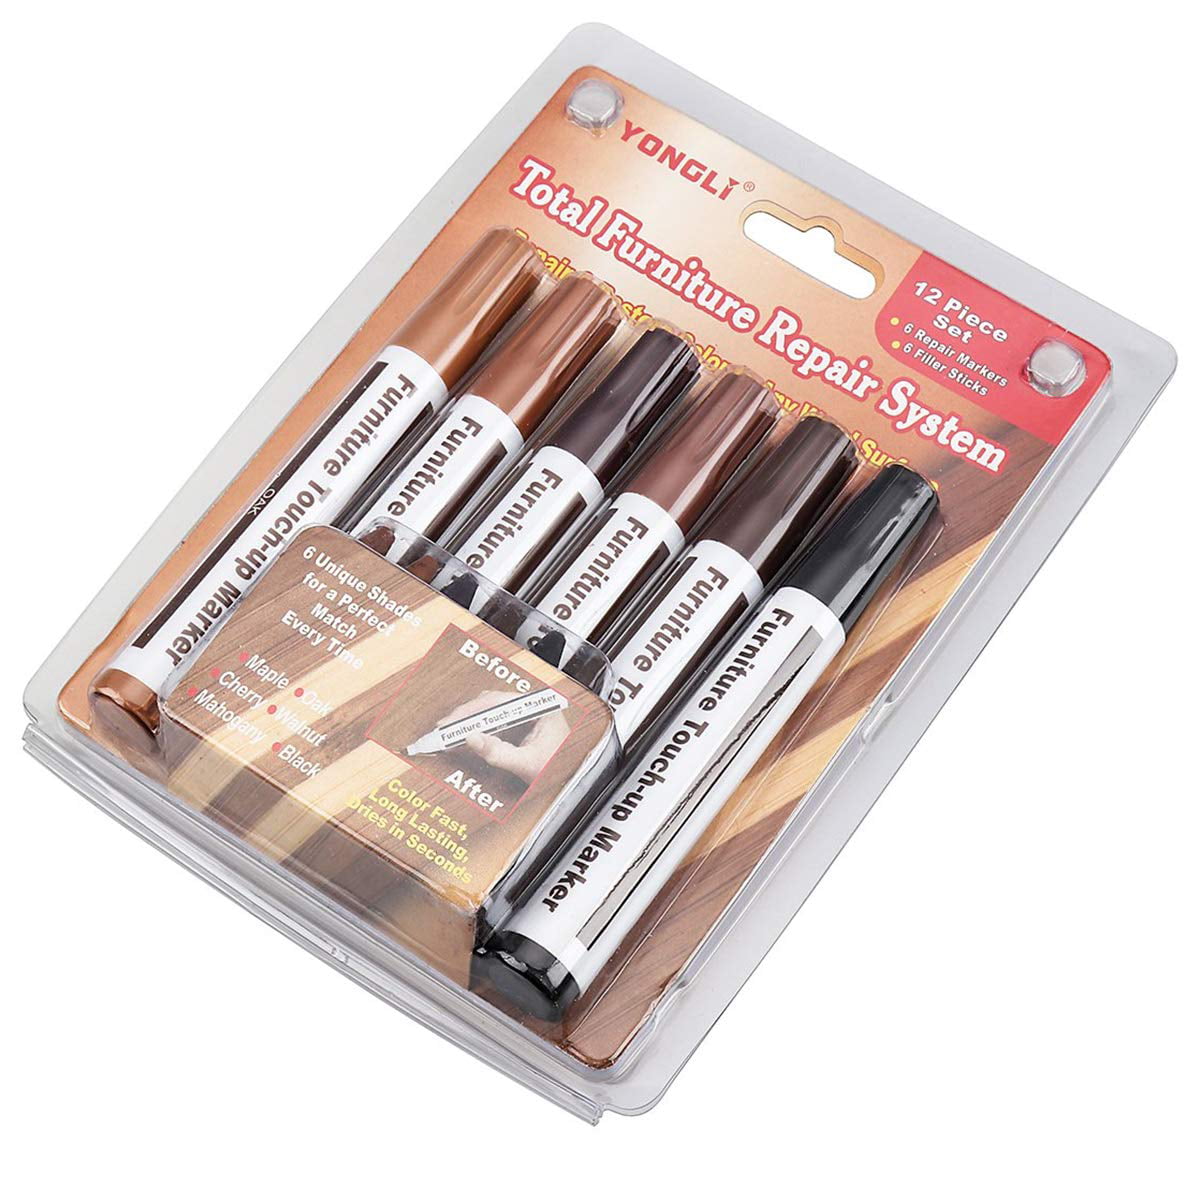 Beautyko Ideaworks 12-Piece Wood Touch-Up Markers and Wax Sticks for Repairing